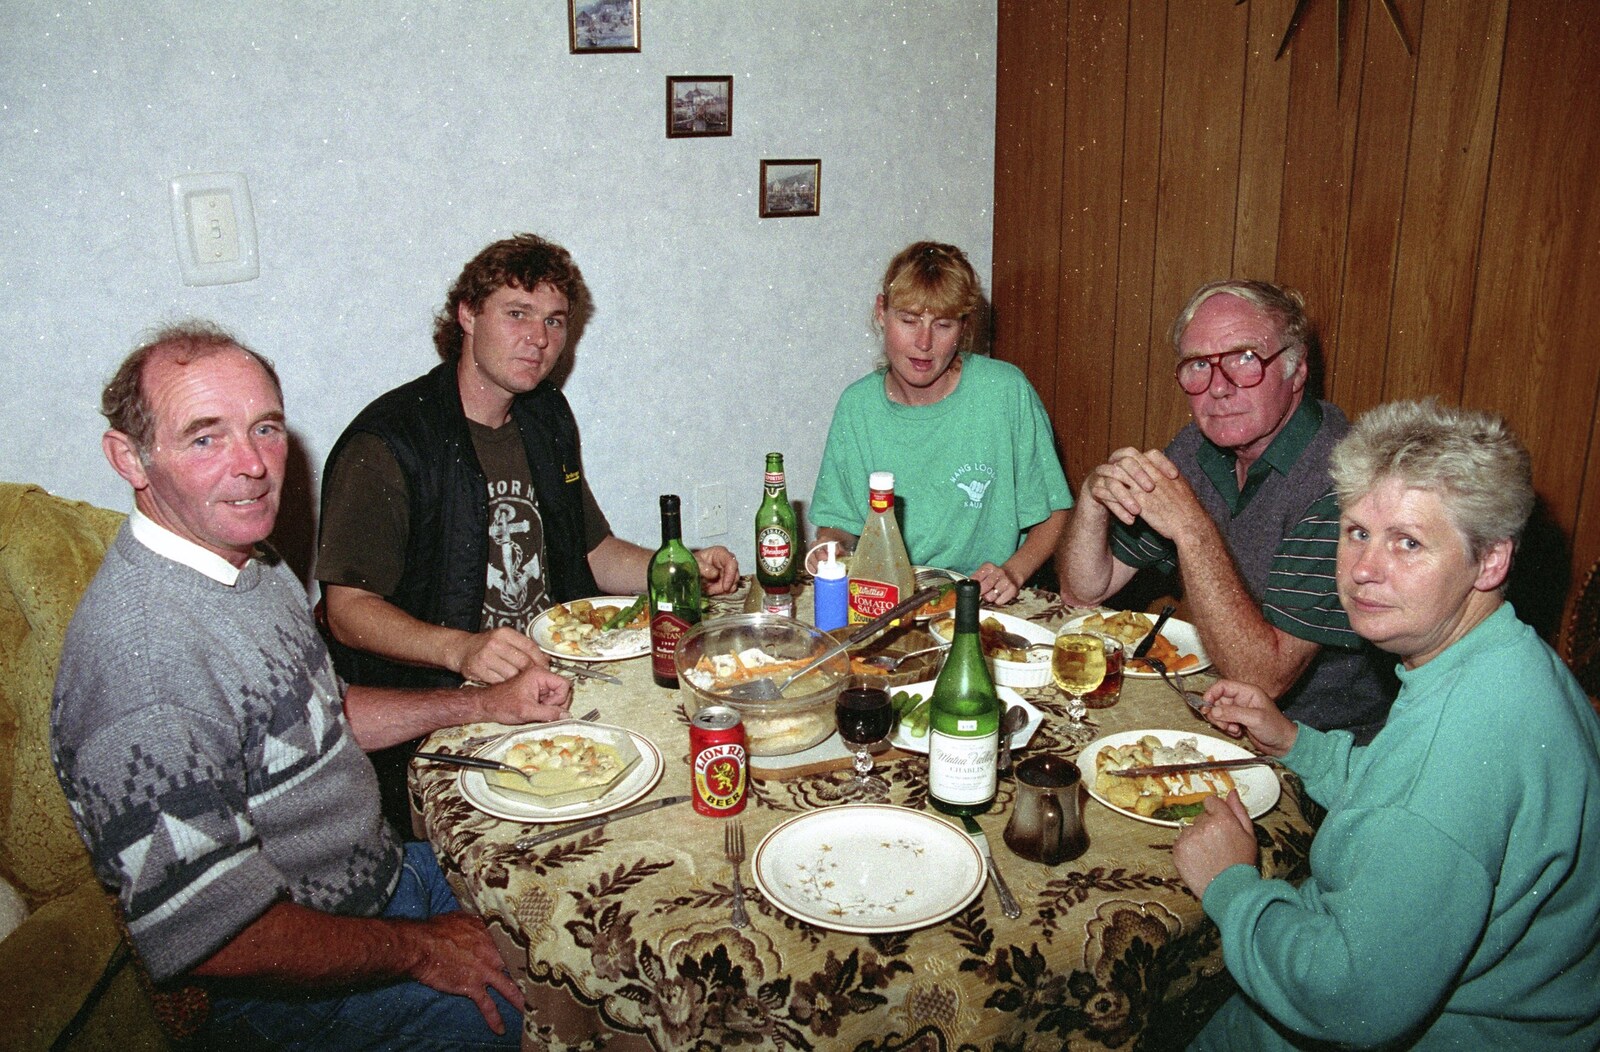 A family gathering around the table at the Motel from Ferry Landing, Whitianga, New Zealand - 23rd November 1992